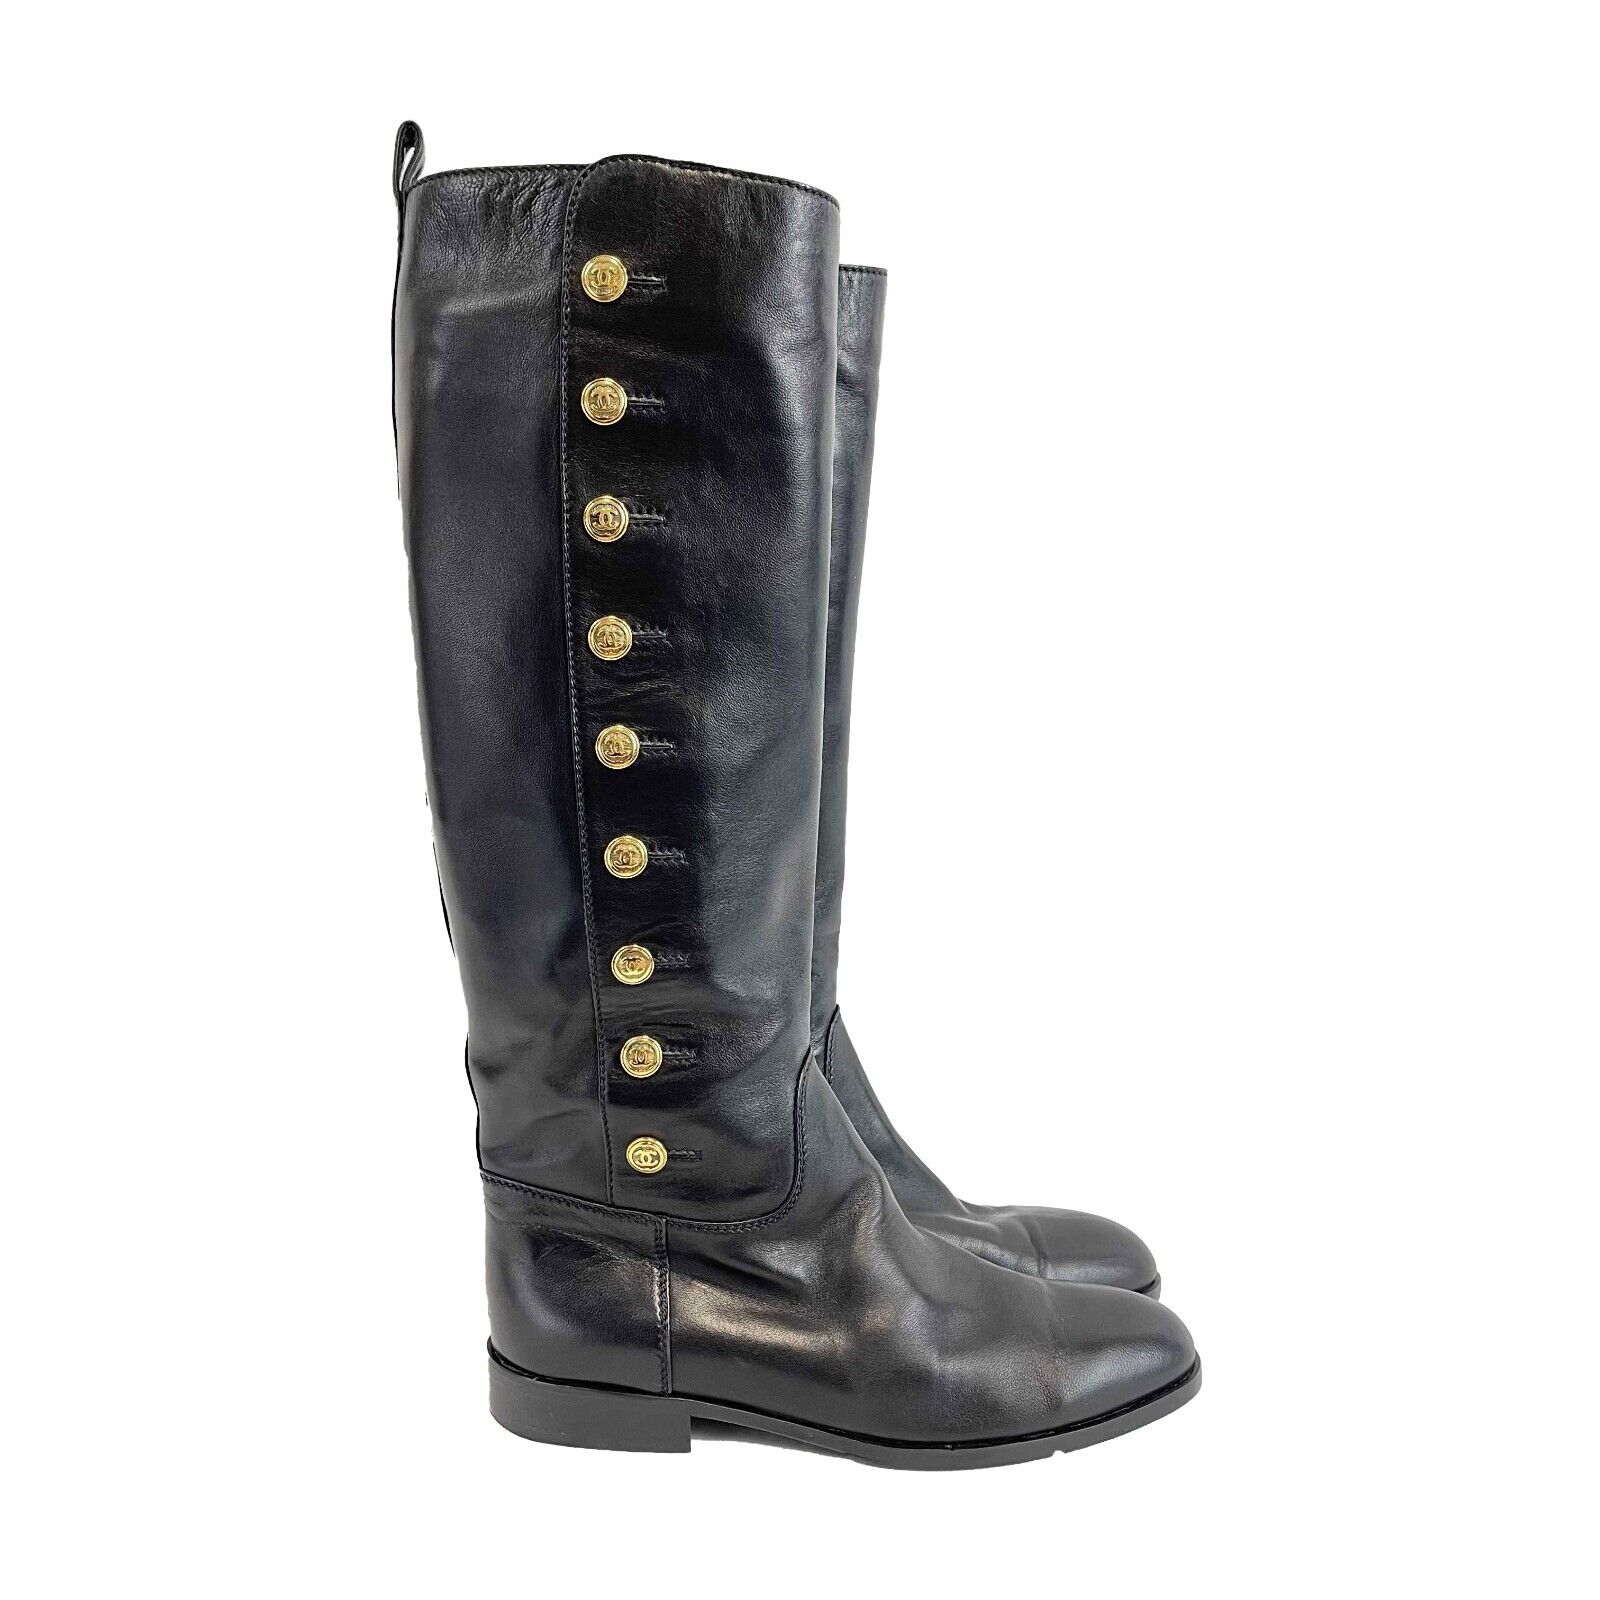 CHANEL - VINTAGE 9 CC Gold Buttons Black and Gold Leather Boots